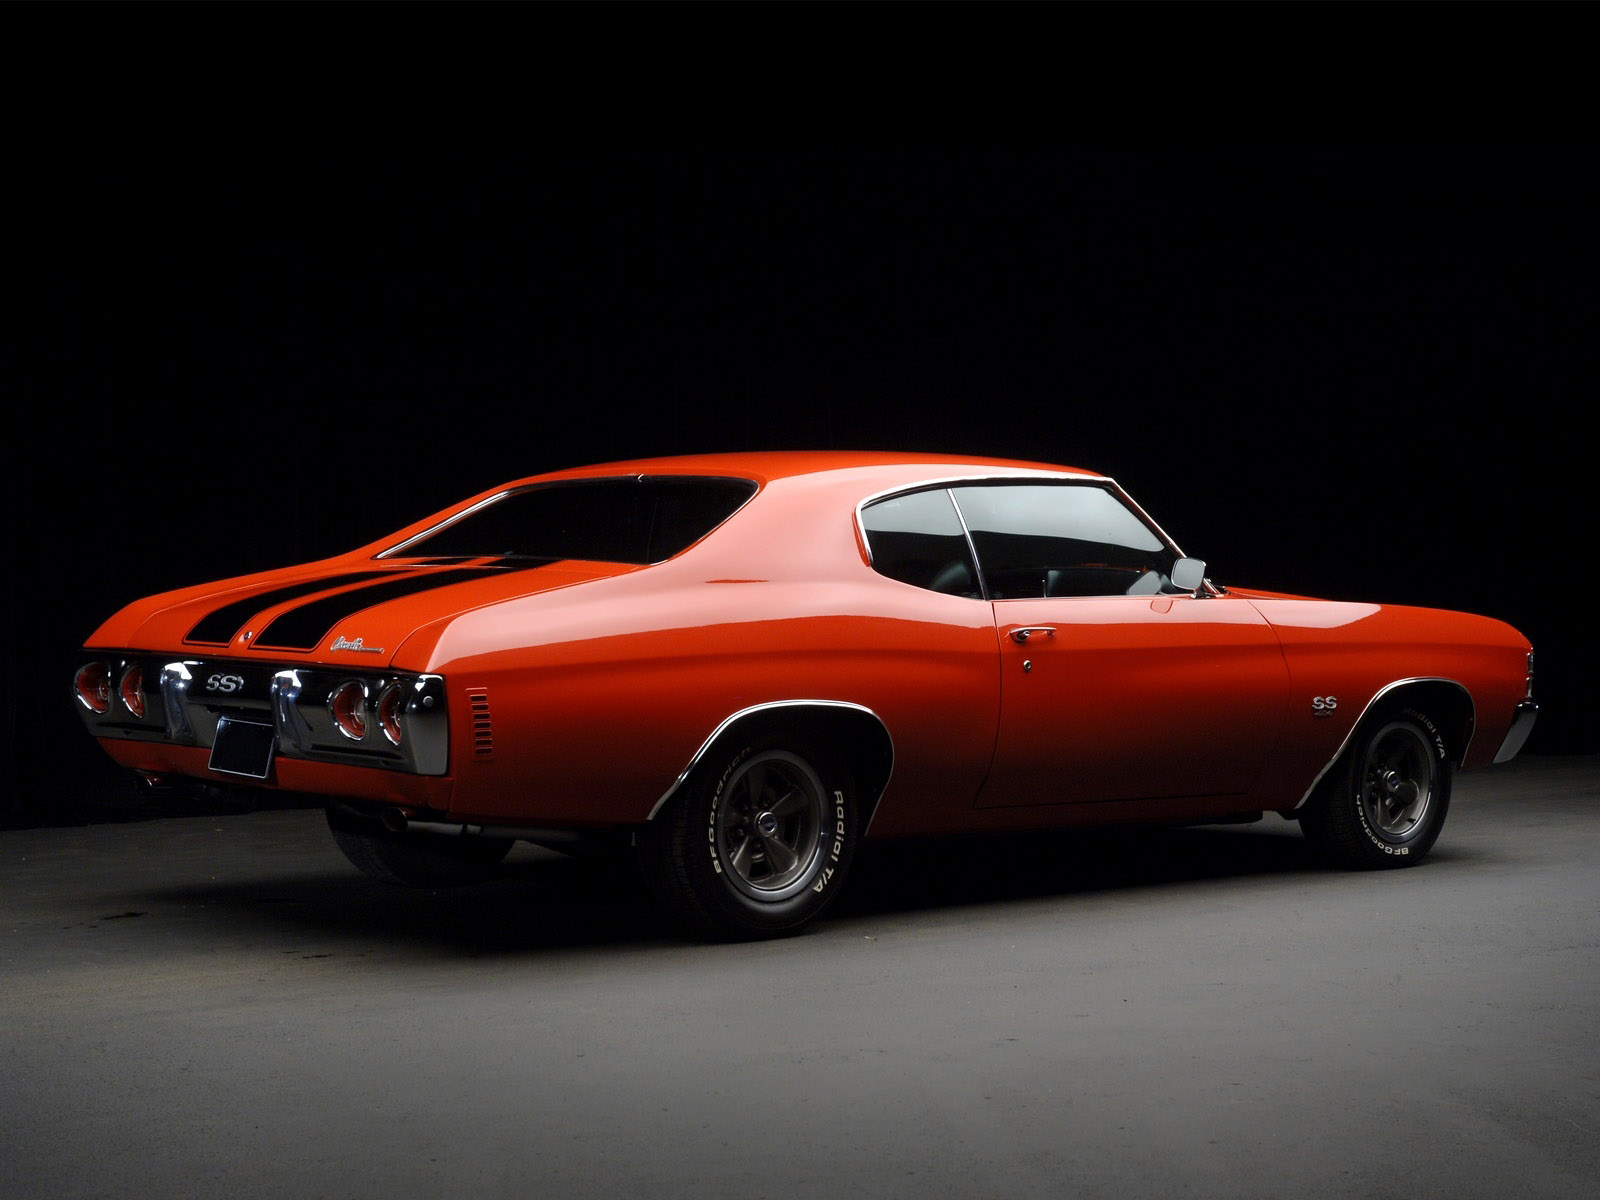 1971 Chevrolet Chevelle S S classic muscle f wallpaper 1600x1200